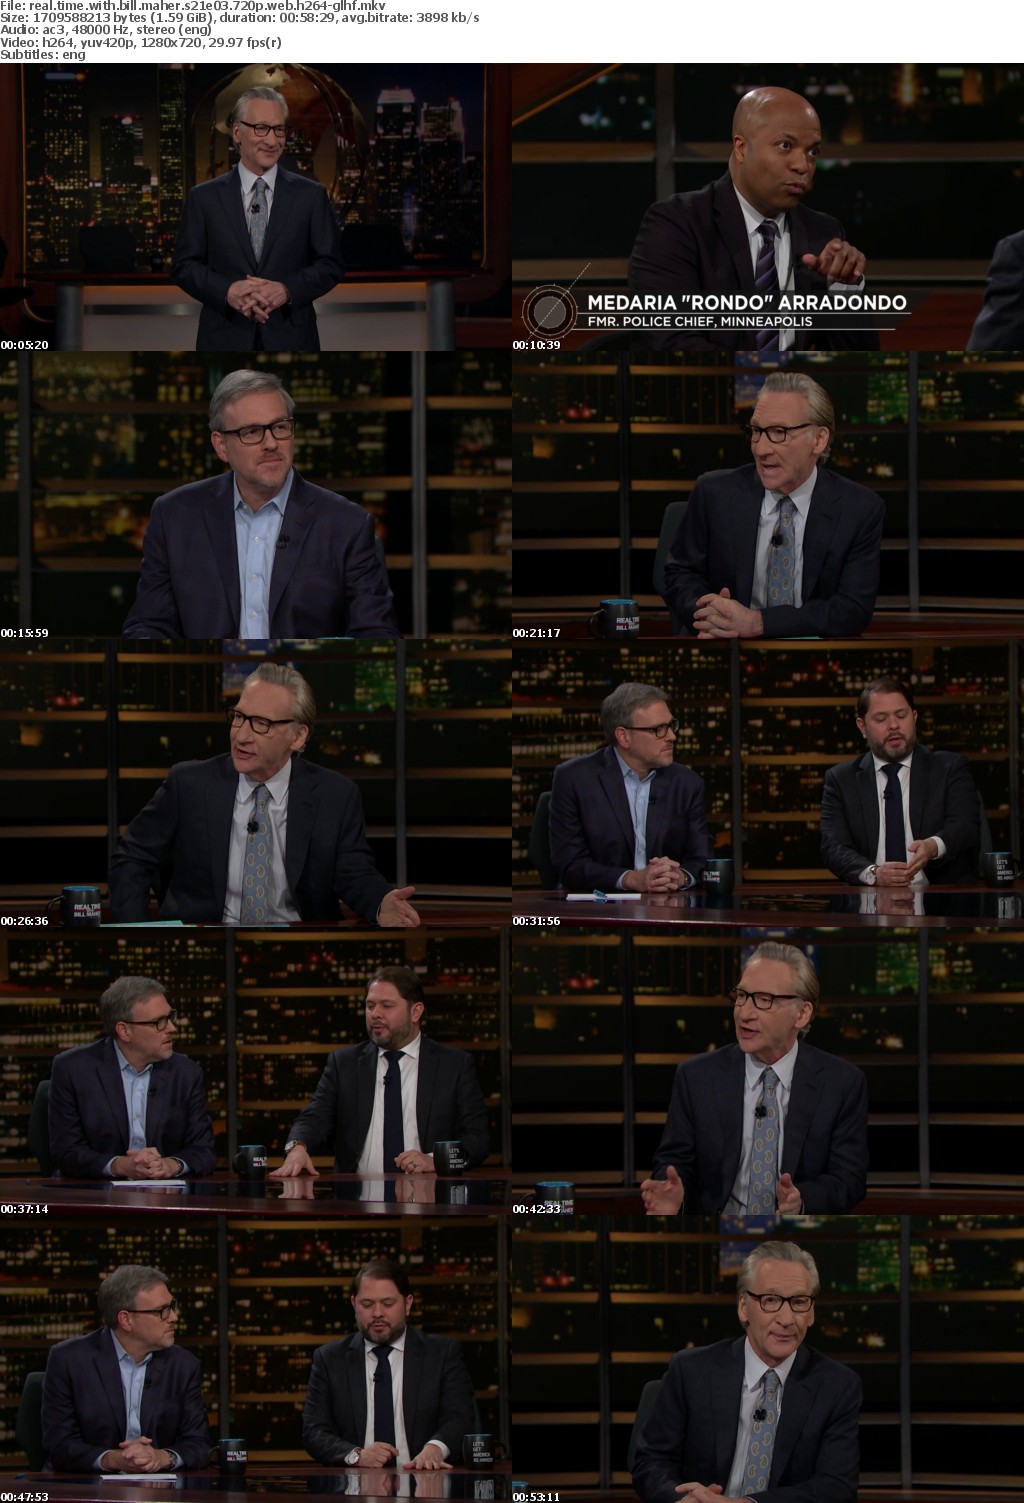 Real Time with Bill Maher S21E03 720p WEB H264-GLHF